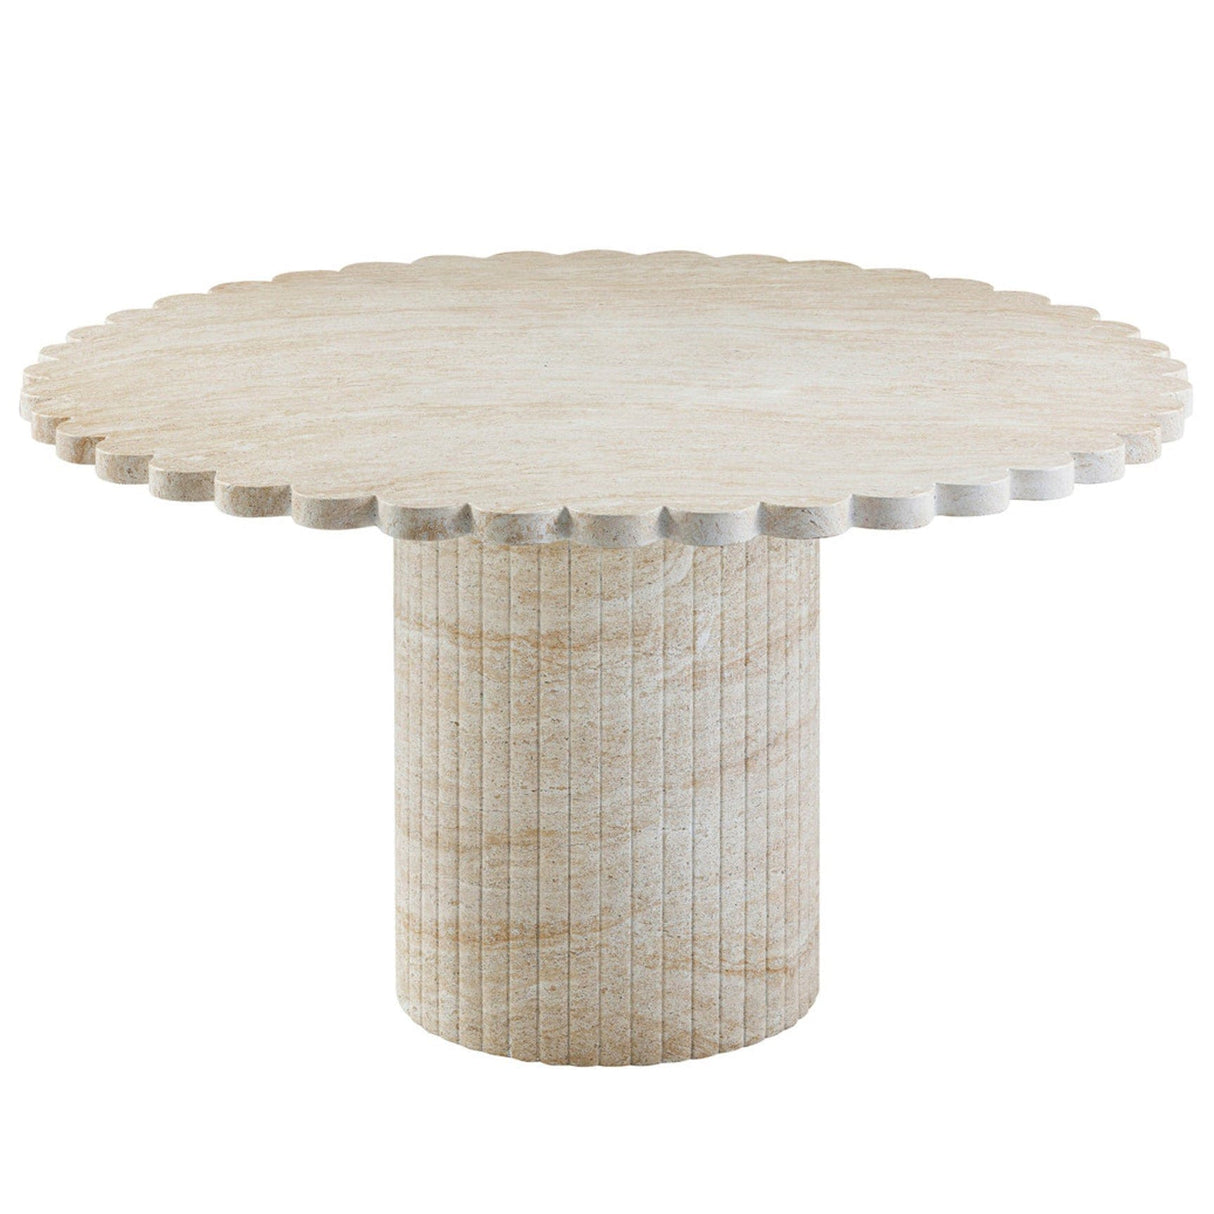 Candelabra Home Blossom Washed Travertine Finish Indoor / Outdoor 54" Round Dining Table Outdoor Dining Tables TOV-D54349